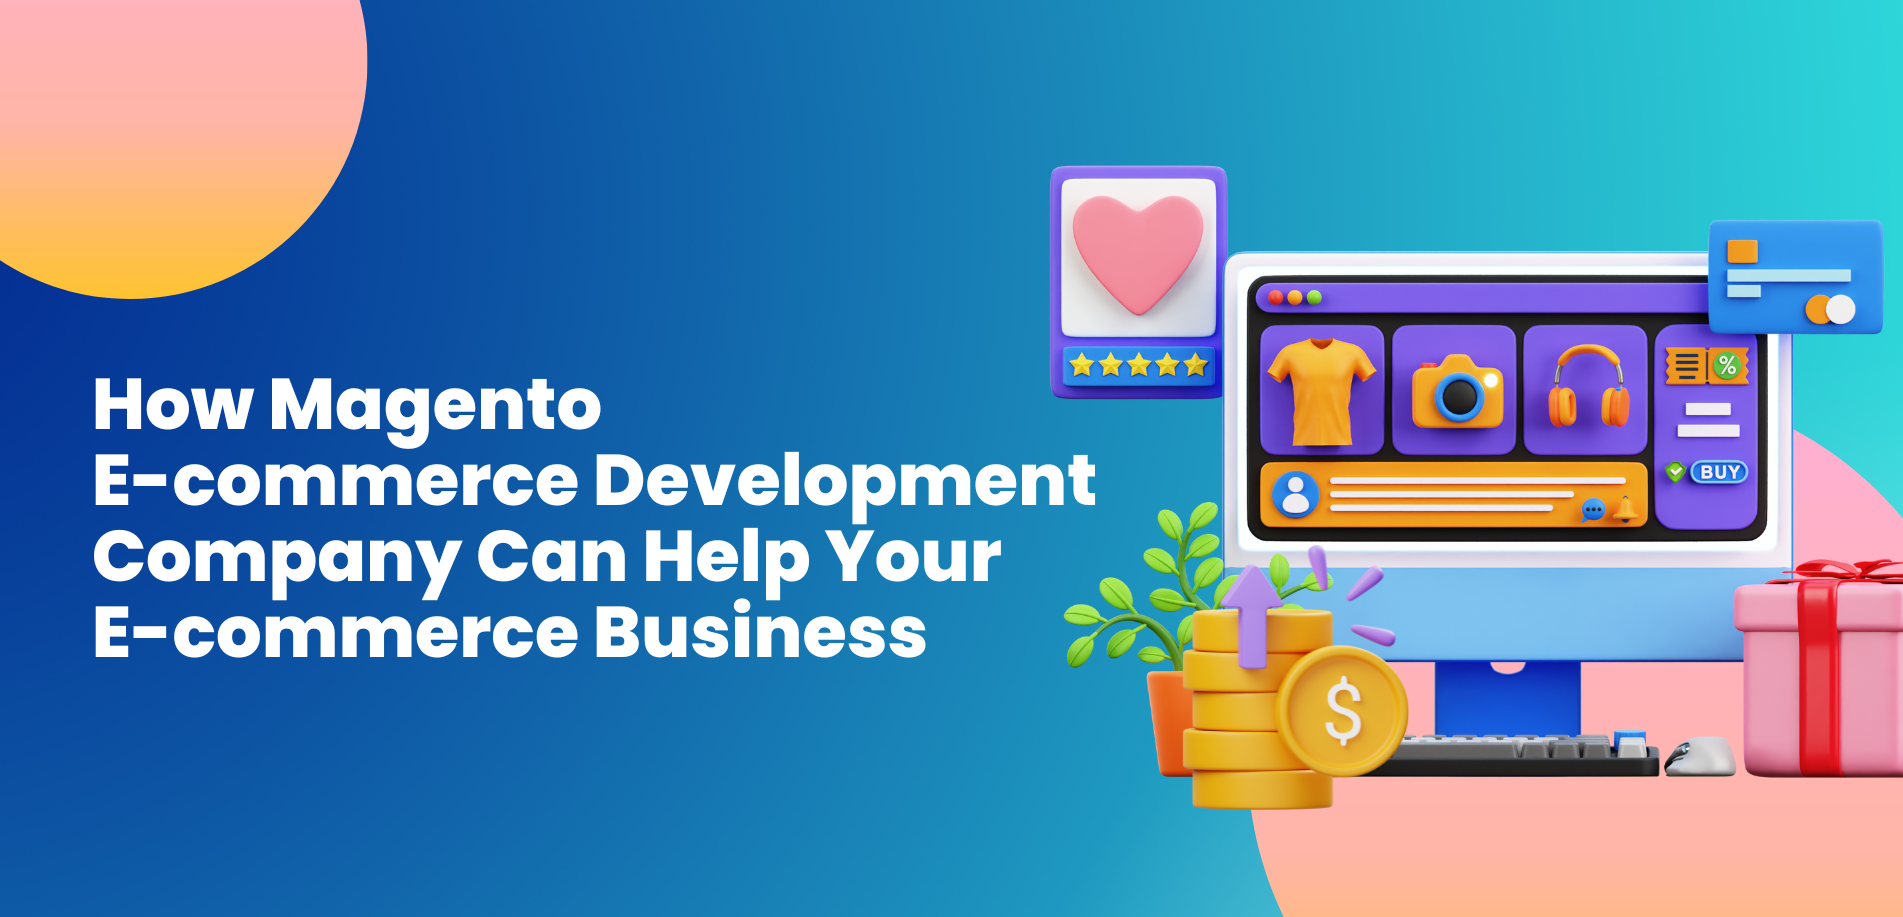 How Magento E-commerce Development Company Can Help Your Business